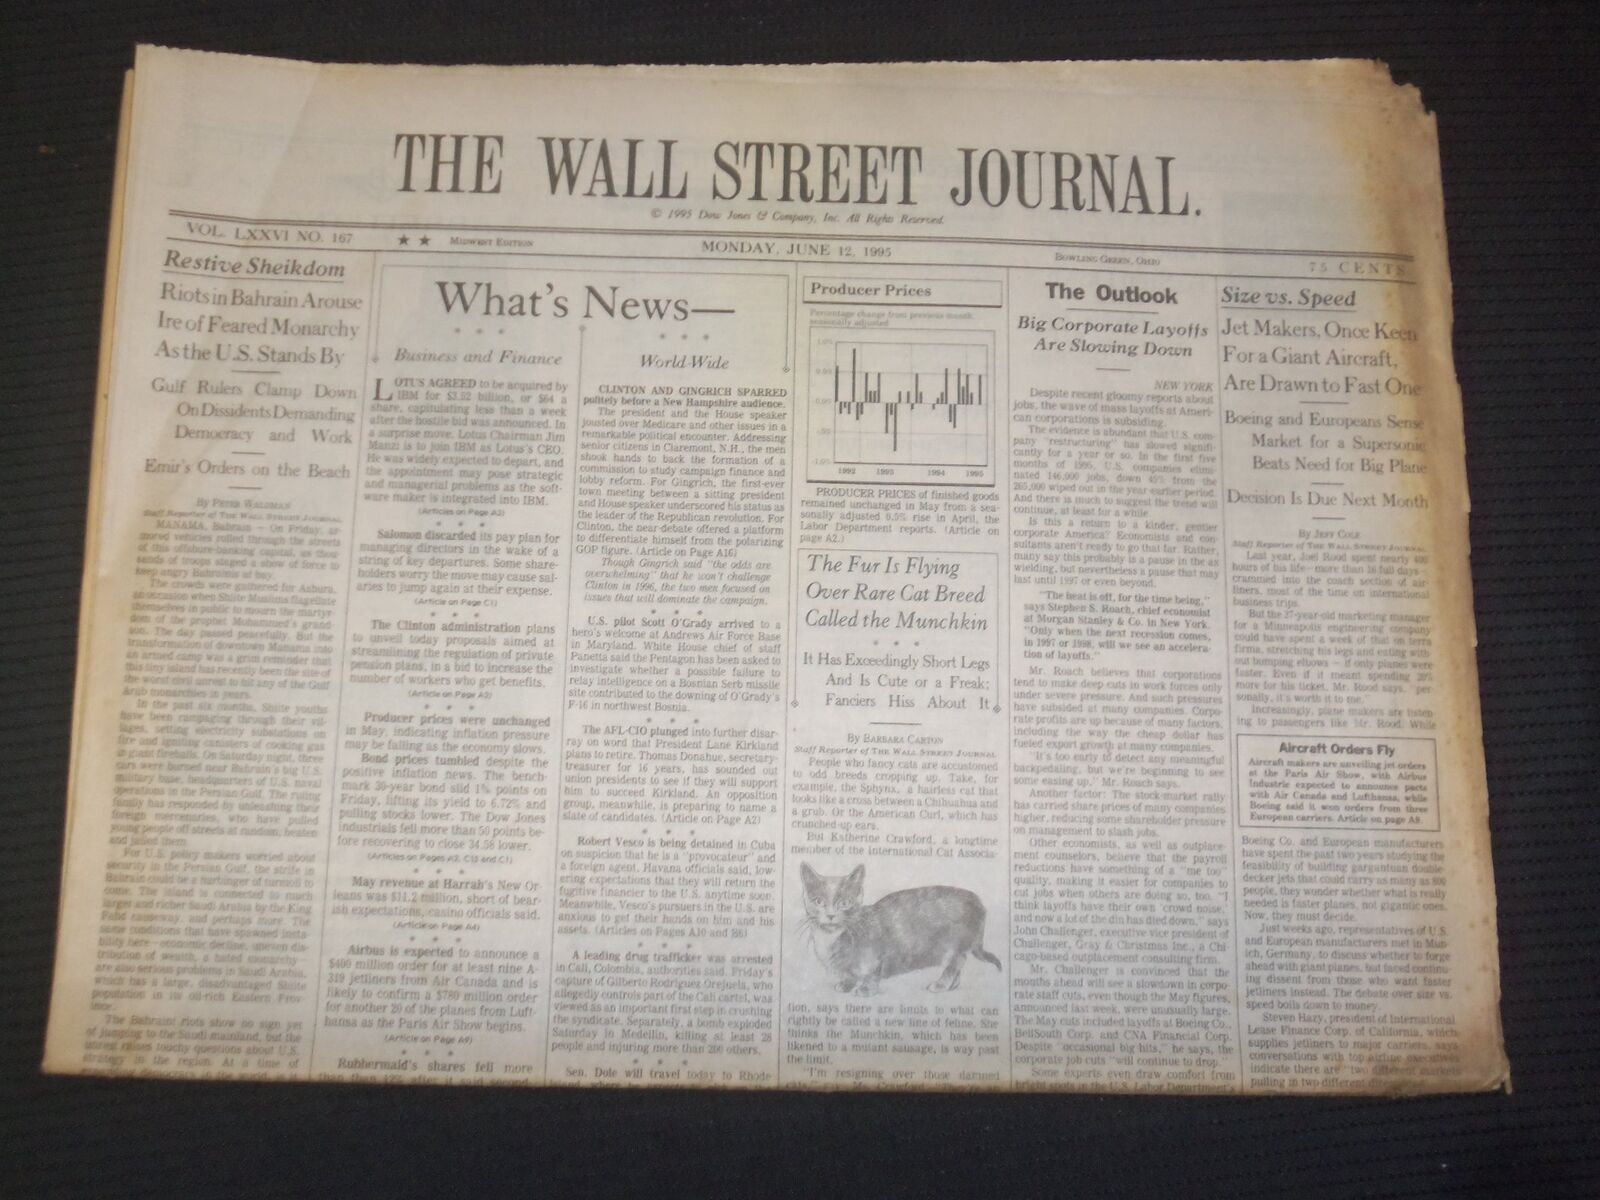 1995 JUNE 12 THE WALL STREET JOURNAL - RIOTS IN BAHRAIN AROUSE IRE - WJ 192